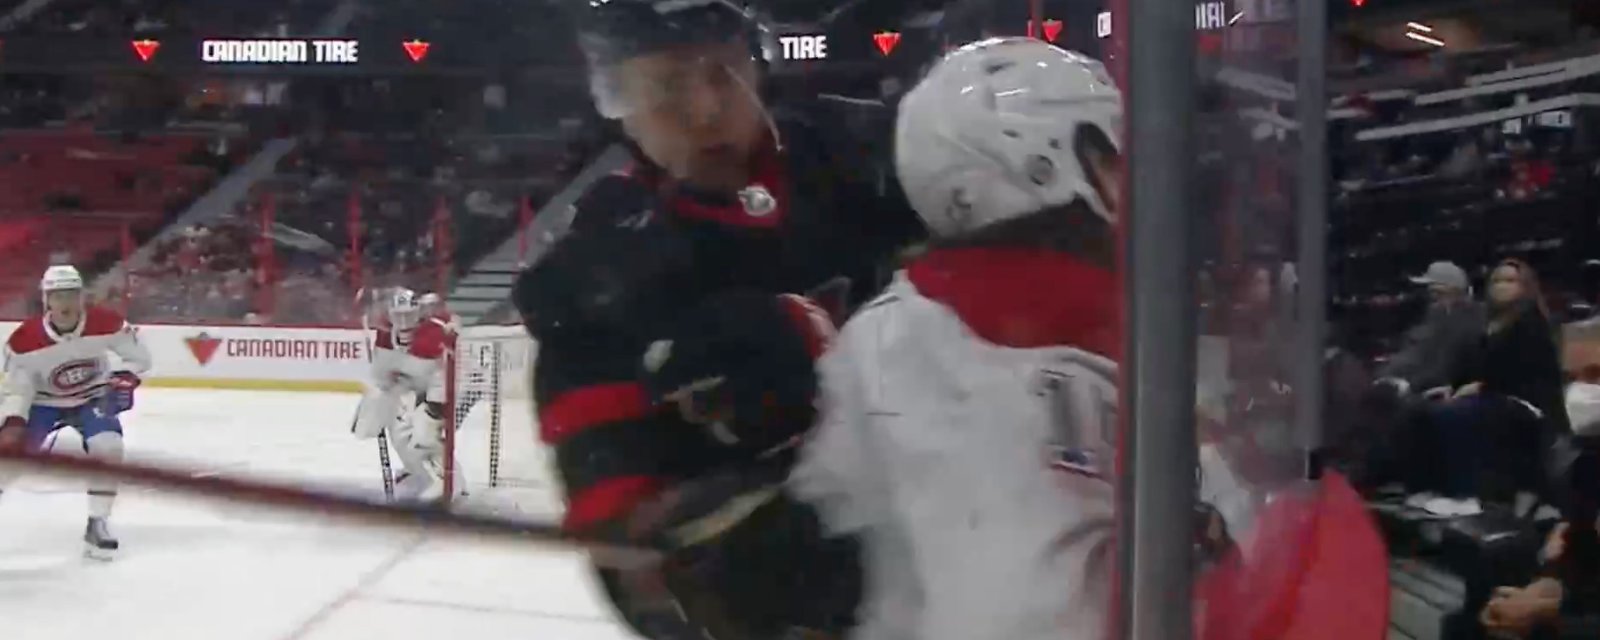 Referees miss dangerous hit on Sami Niku that leaves him bloody on the ice 